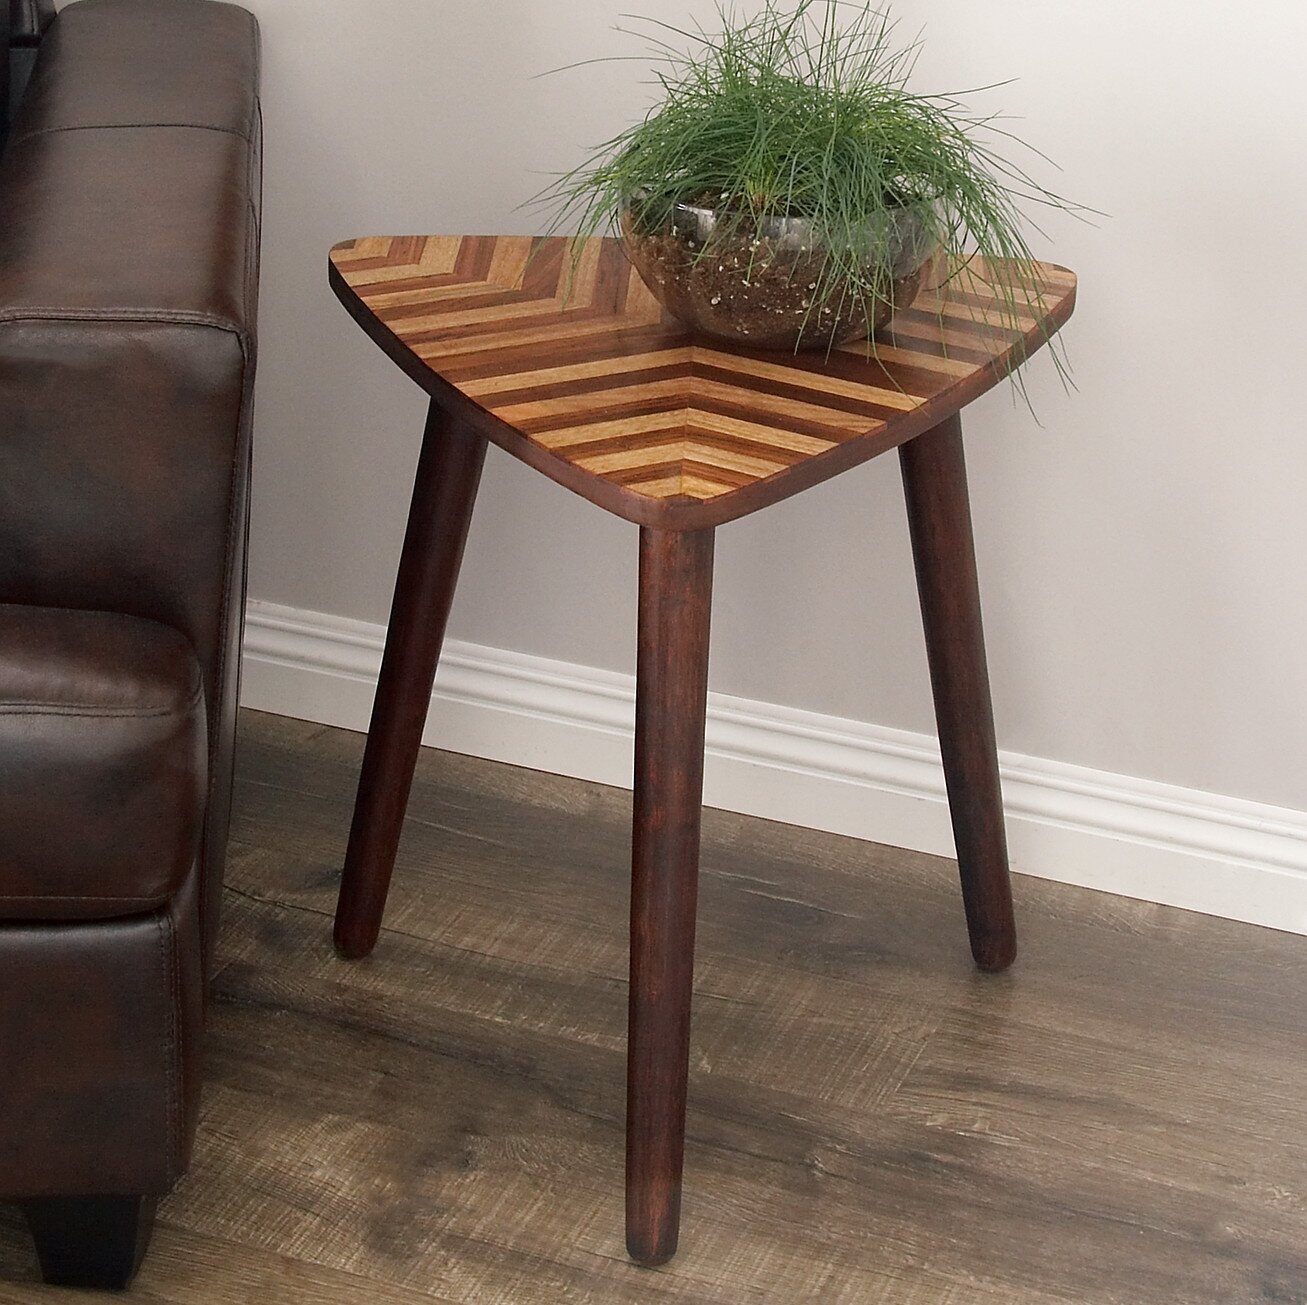 Wooden Round Edged Triangle Table 